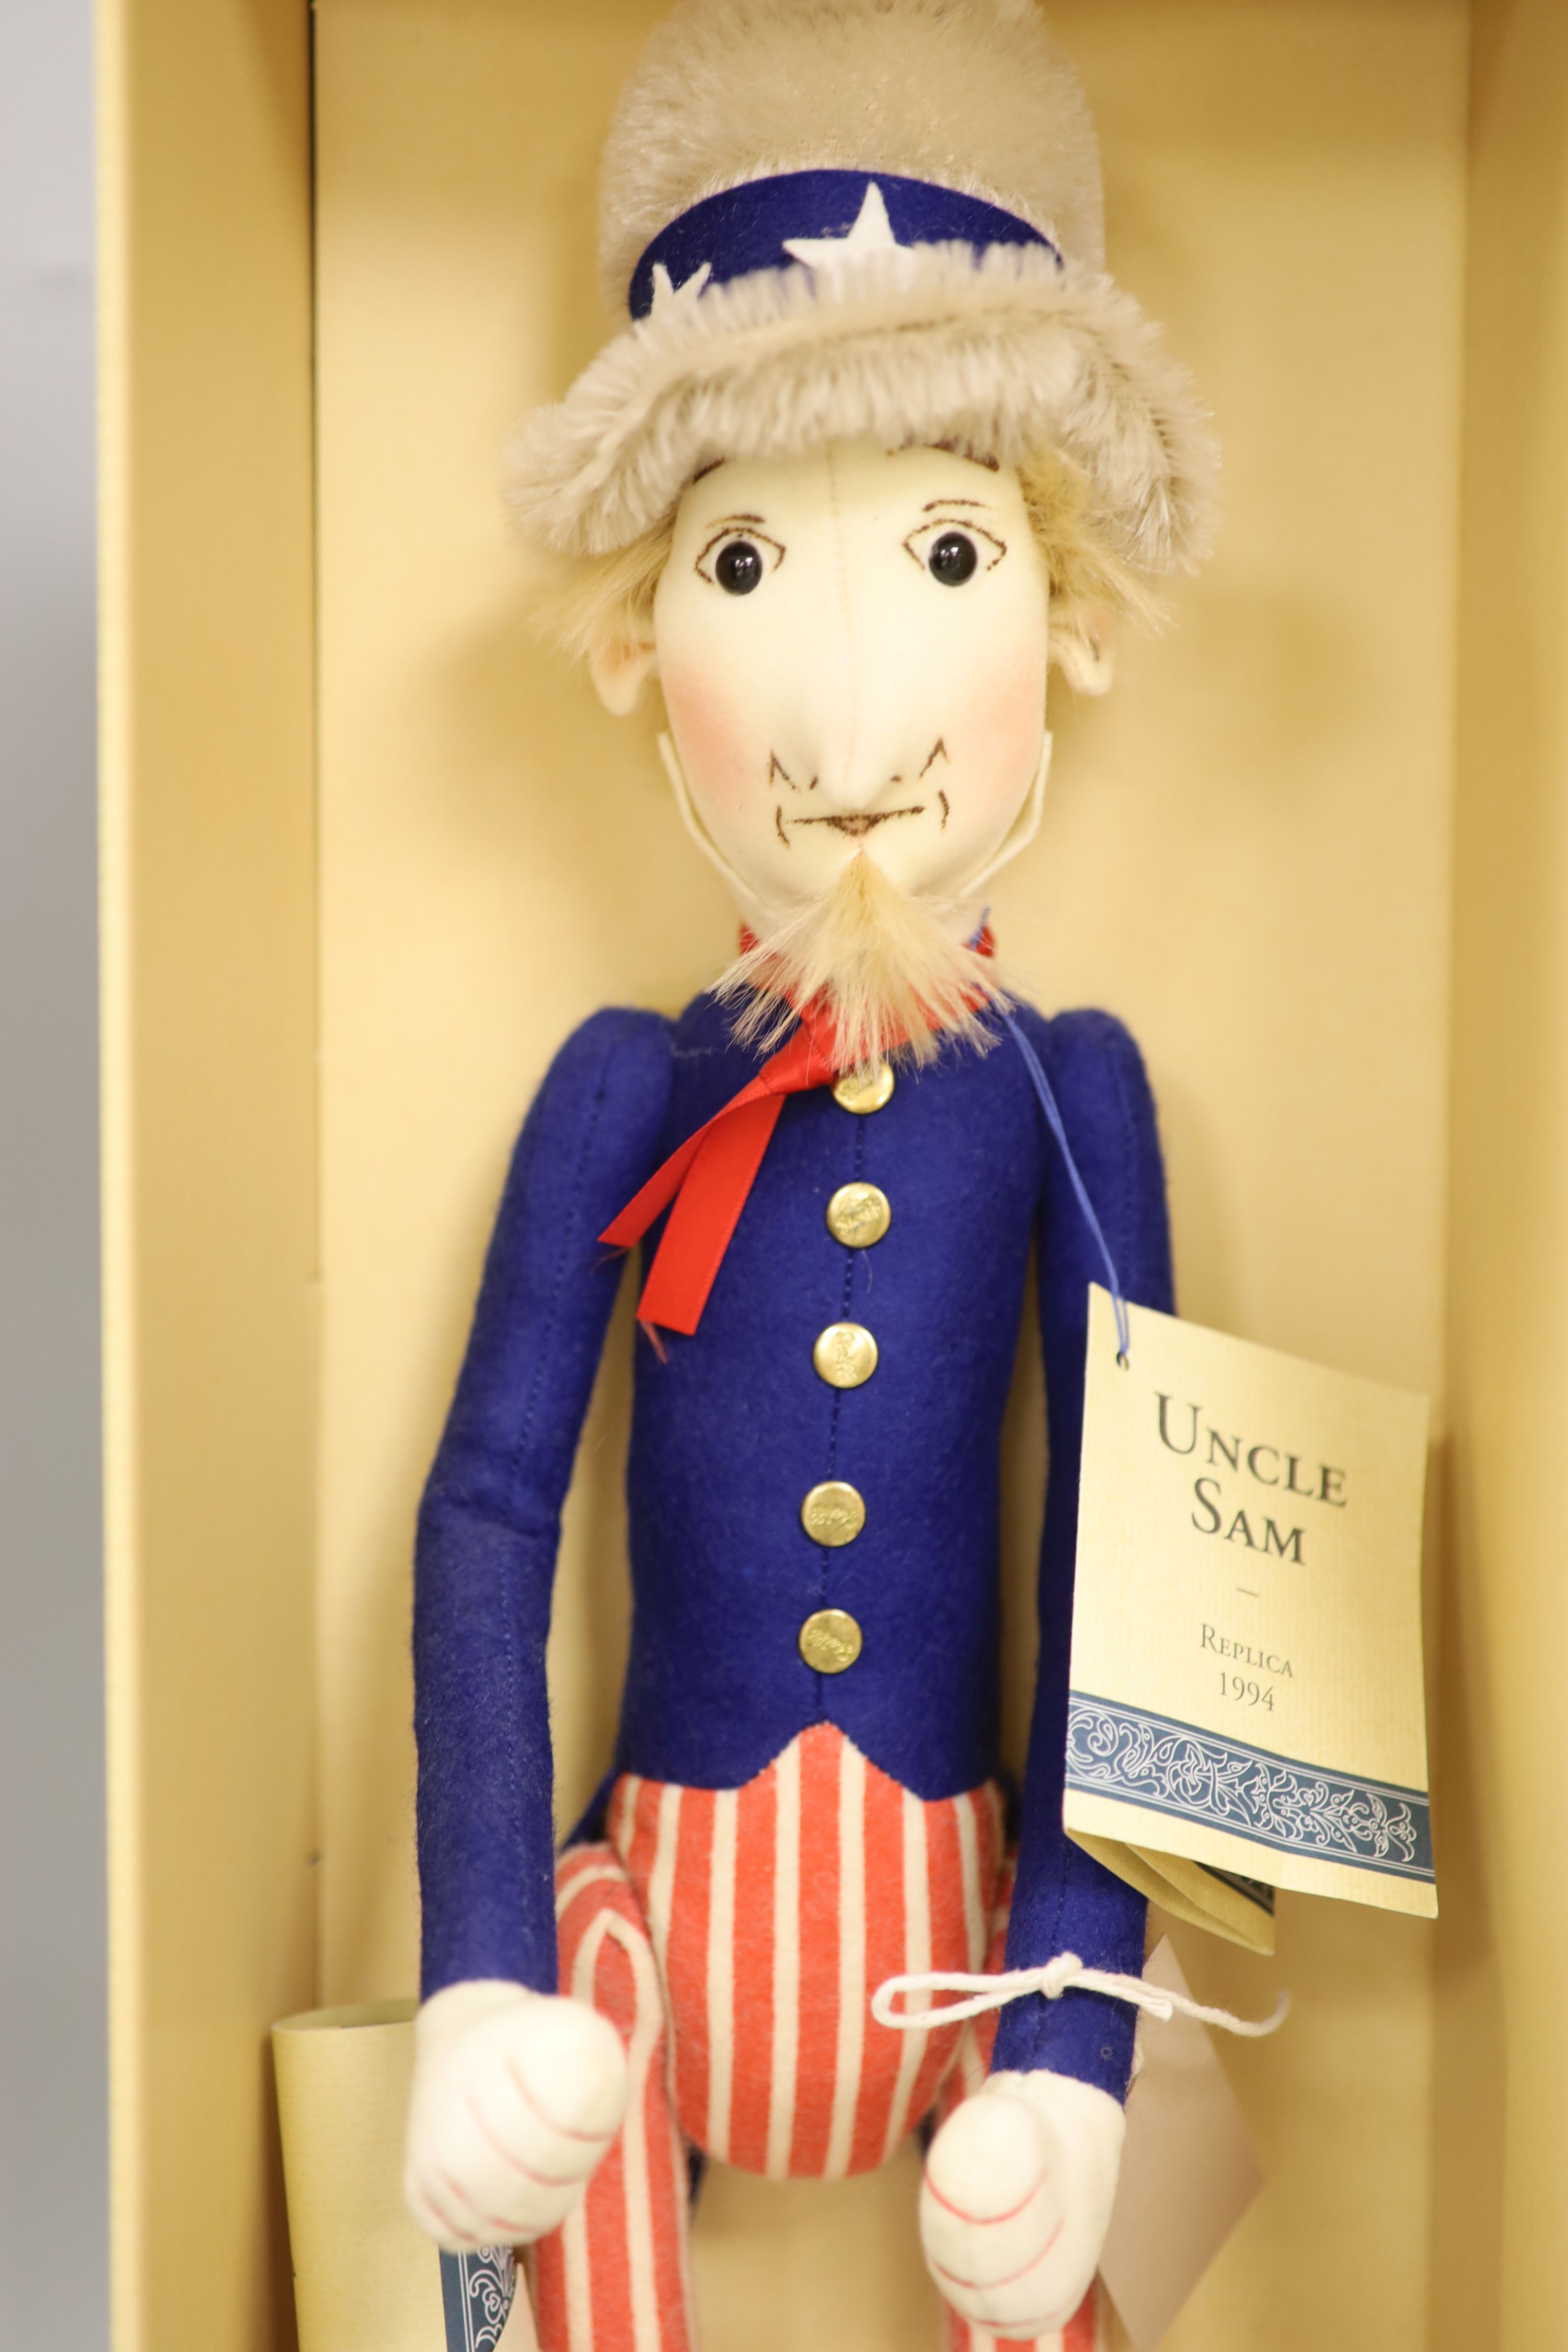 Steiff 'Uncle Sam' doll, box and certificate, Steiff Father Christmas bear limited edition, box and certificate